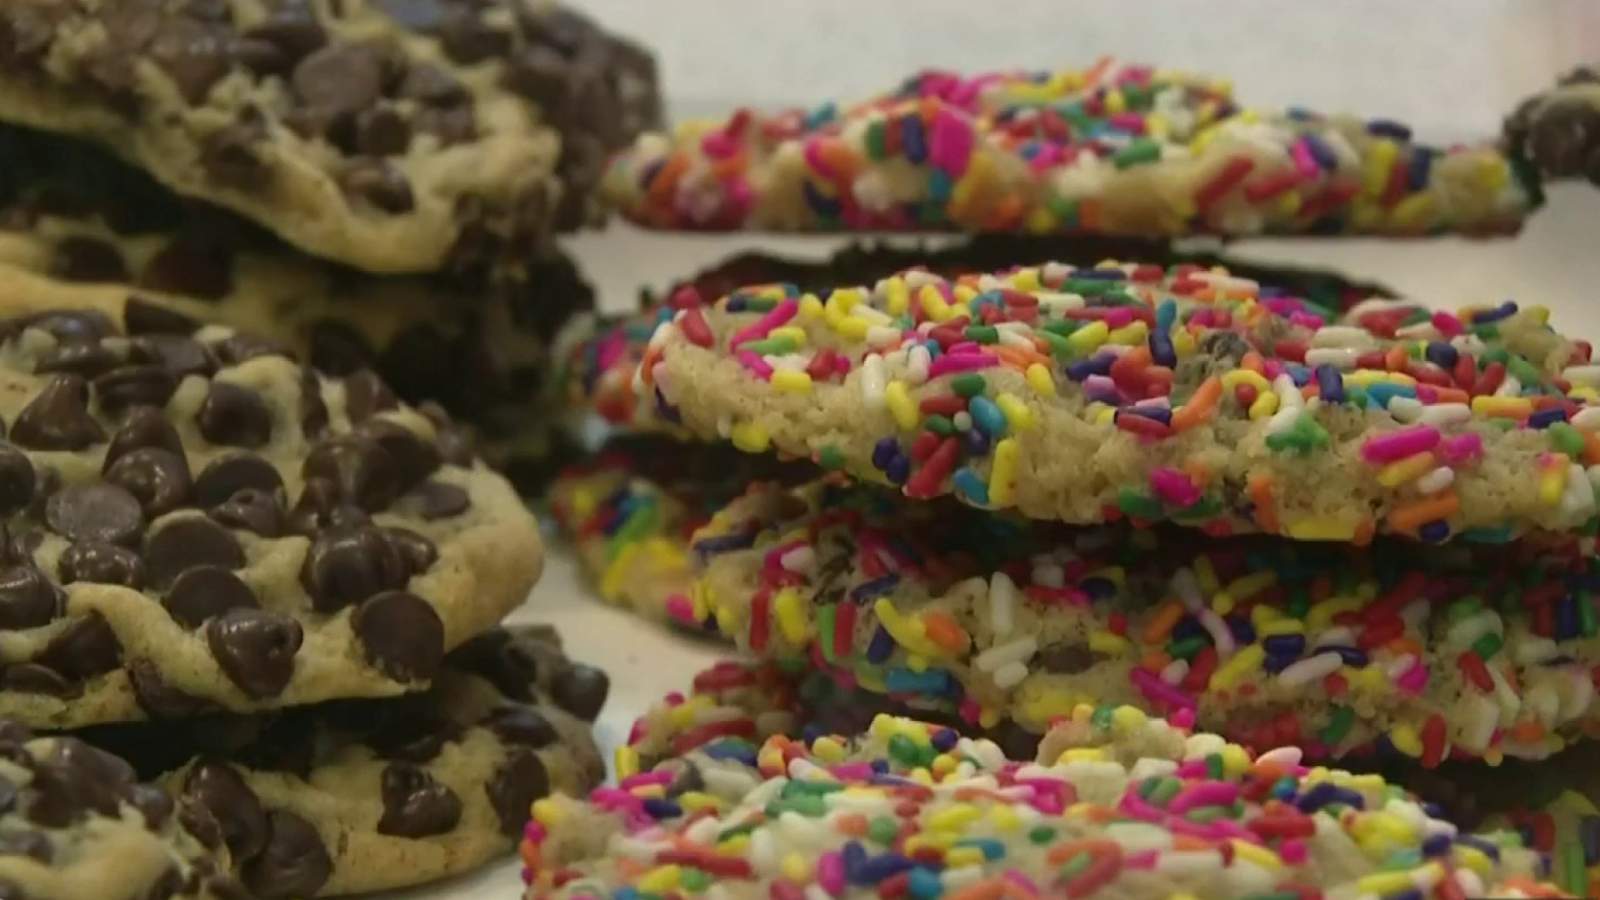 Make your cookies even sweeter for National Homemade Cookies Day